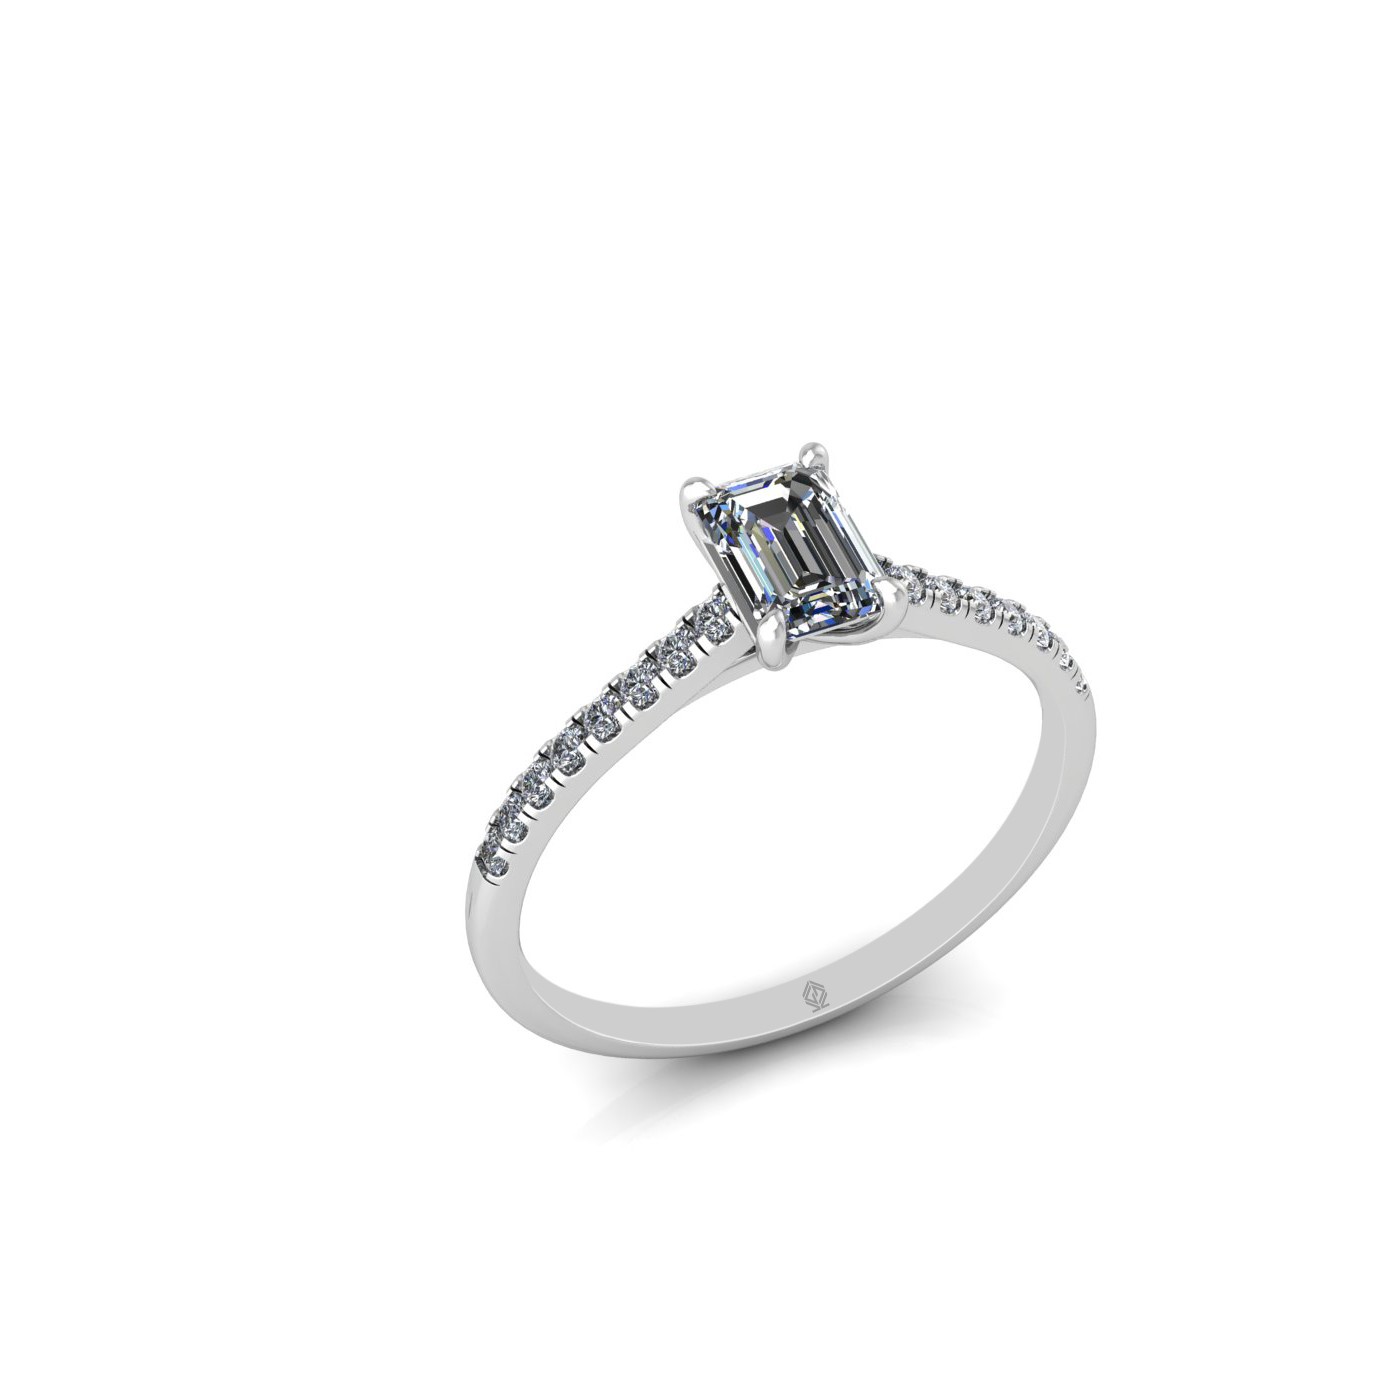 18k white gold  0,50 ct 4 prongs emerald cut diamond engagement ring with whisper thin pavÉ set band Photos & images